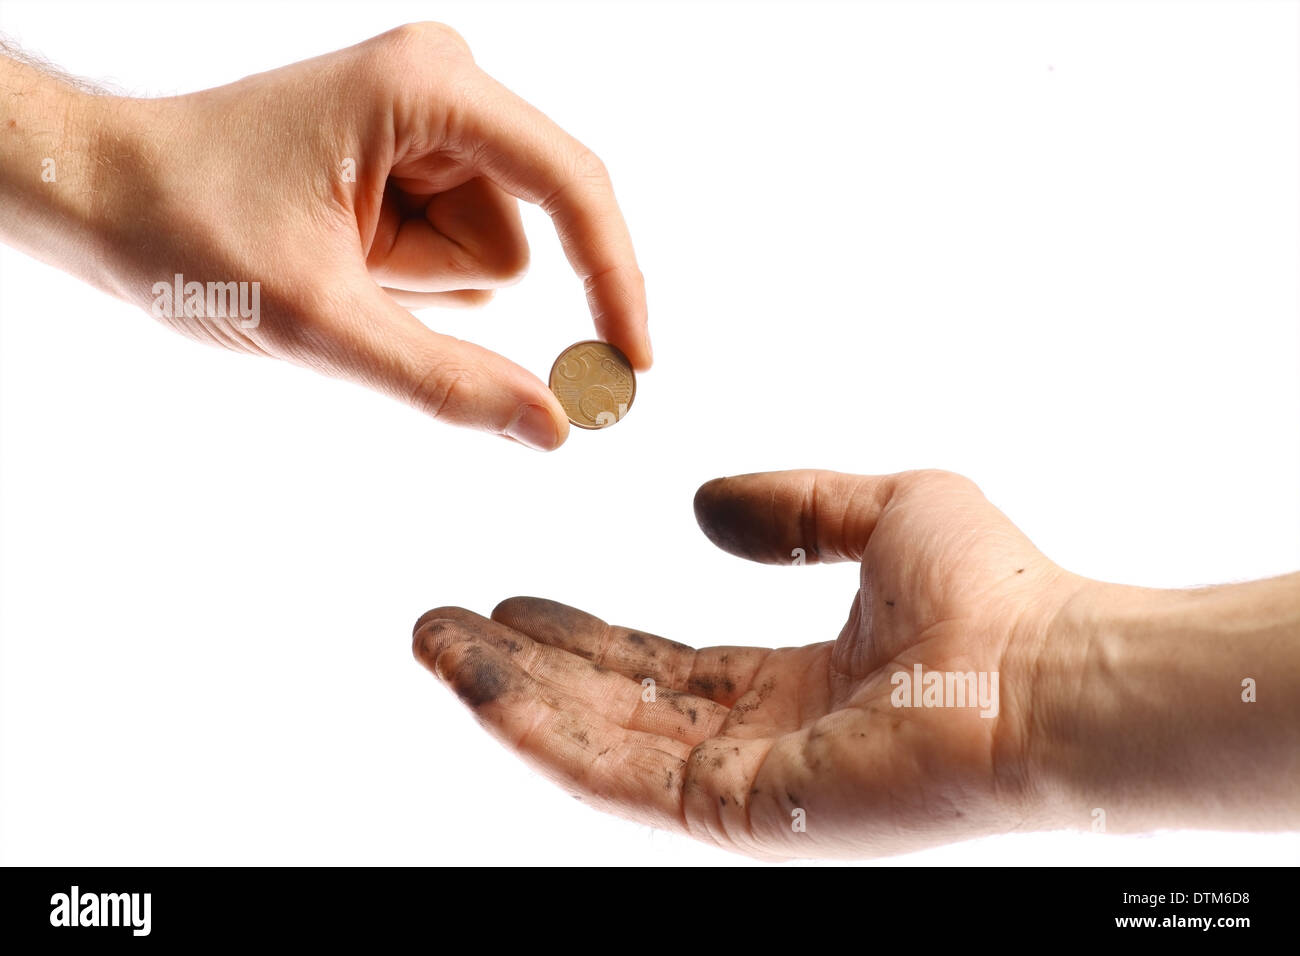 A clean hand offering a coin to a dirty hand. Stock Photo